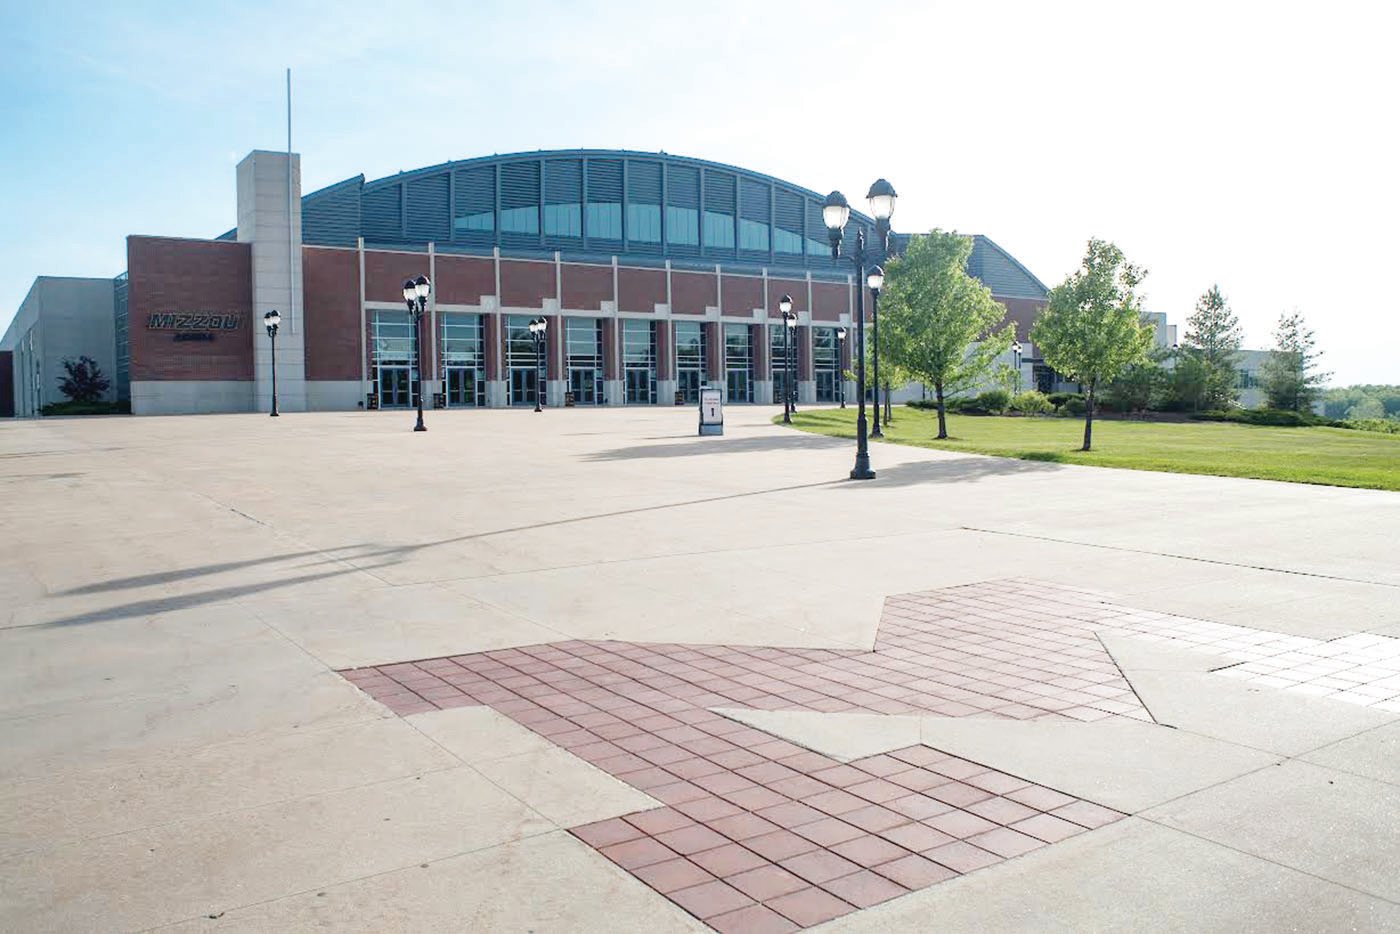 The Missouri State High School Activities Association recently announced the Show-Me Showdown state boys’ and girls’ basketball Final Four tournaments will return to the University of Missouri, Mizzou Arena shown, for the 2023-24 academic year.